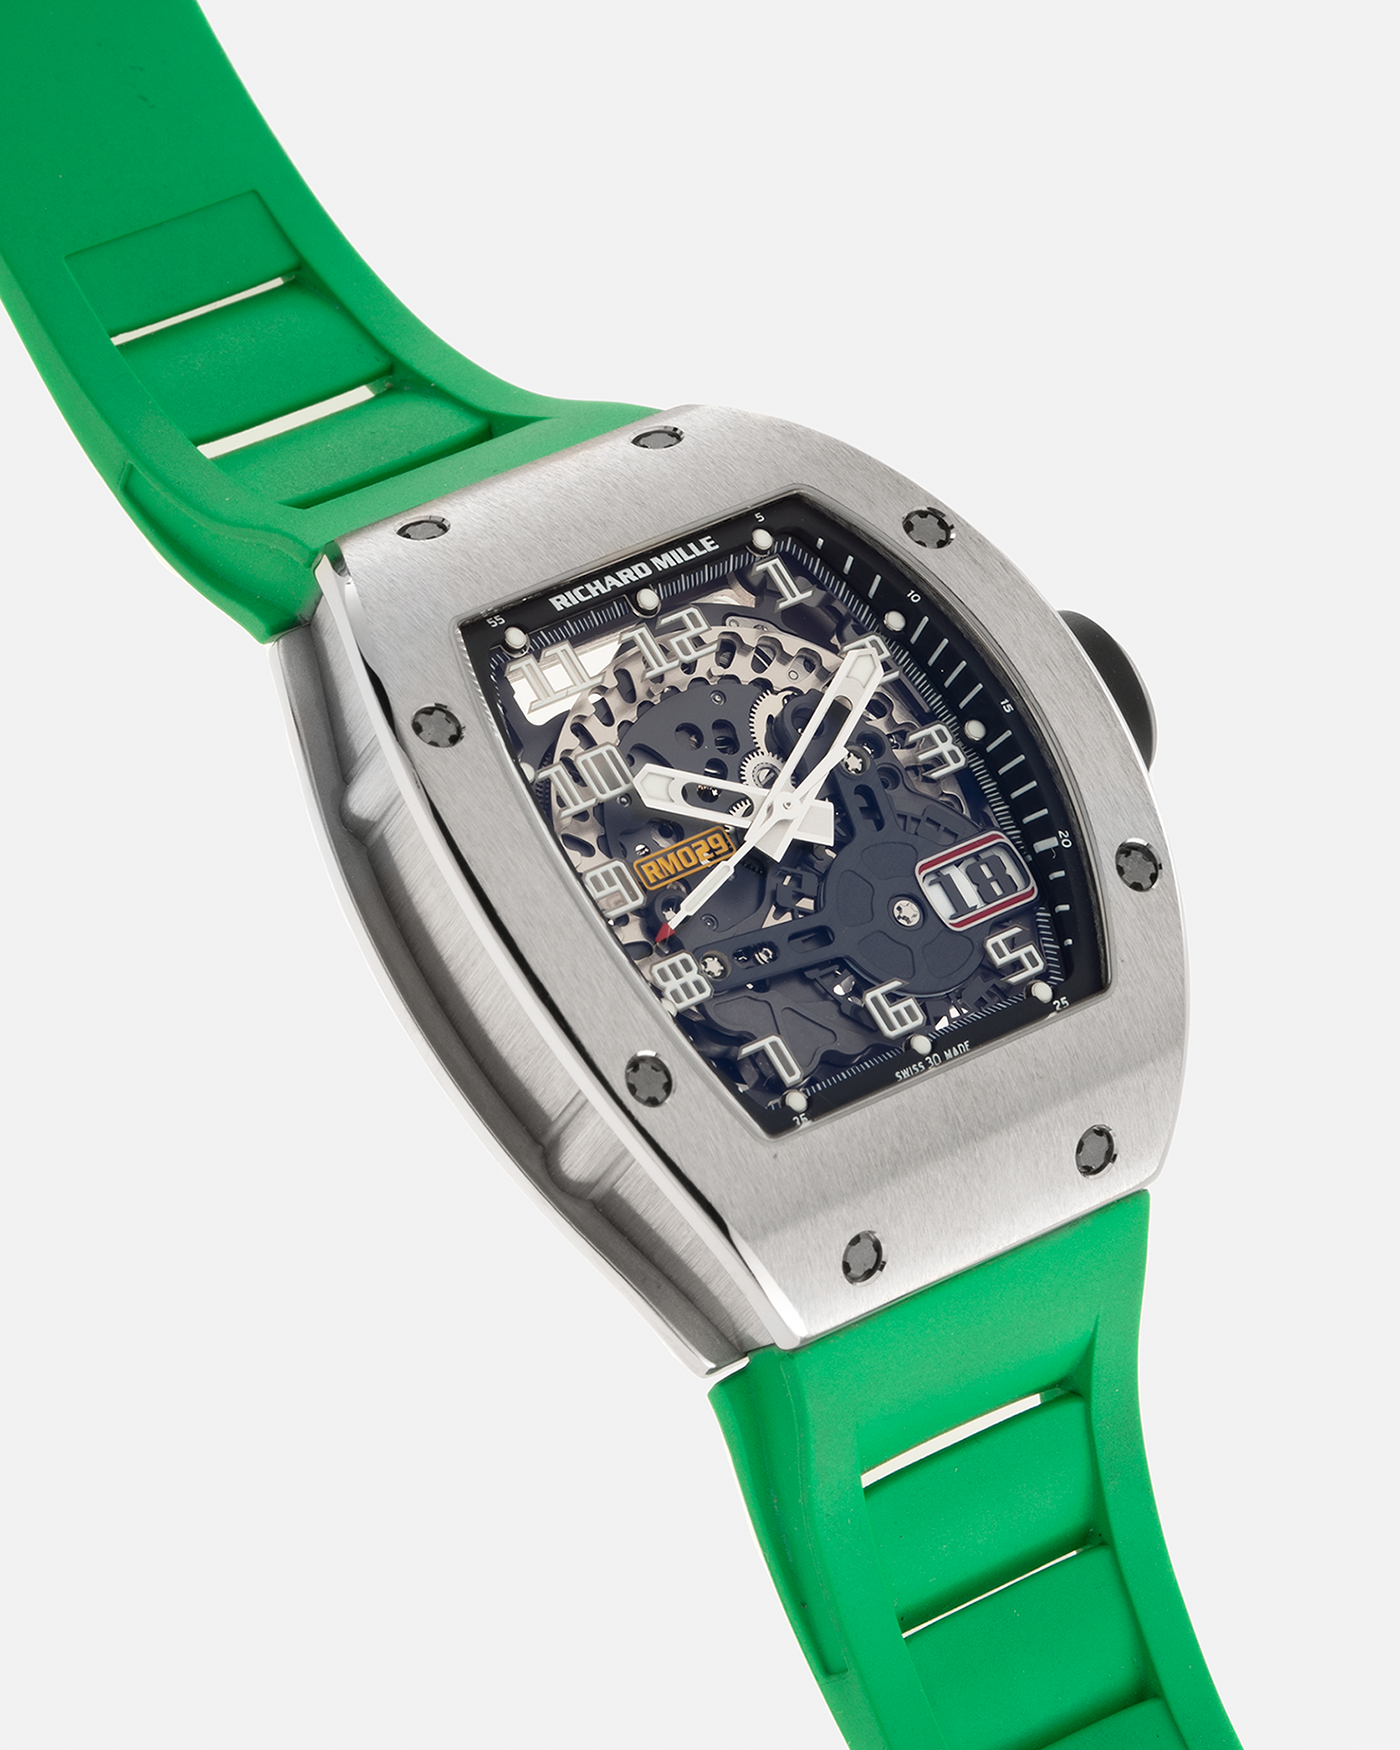 Brand: Richard Mille Year: 2014 Model: RM029 Case Material: 18-carat White Gold Movement: Richard Mille Cal. RMAS7, Self-Winding Case Dimensions: 39.7mm x 48mm  Strap: Richard Mille Green Rubber Strap with Signed Titanium Deployant Clasp, with two additional White and Black Richard Mille Rubber Straps